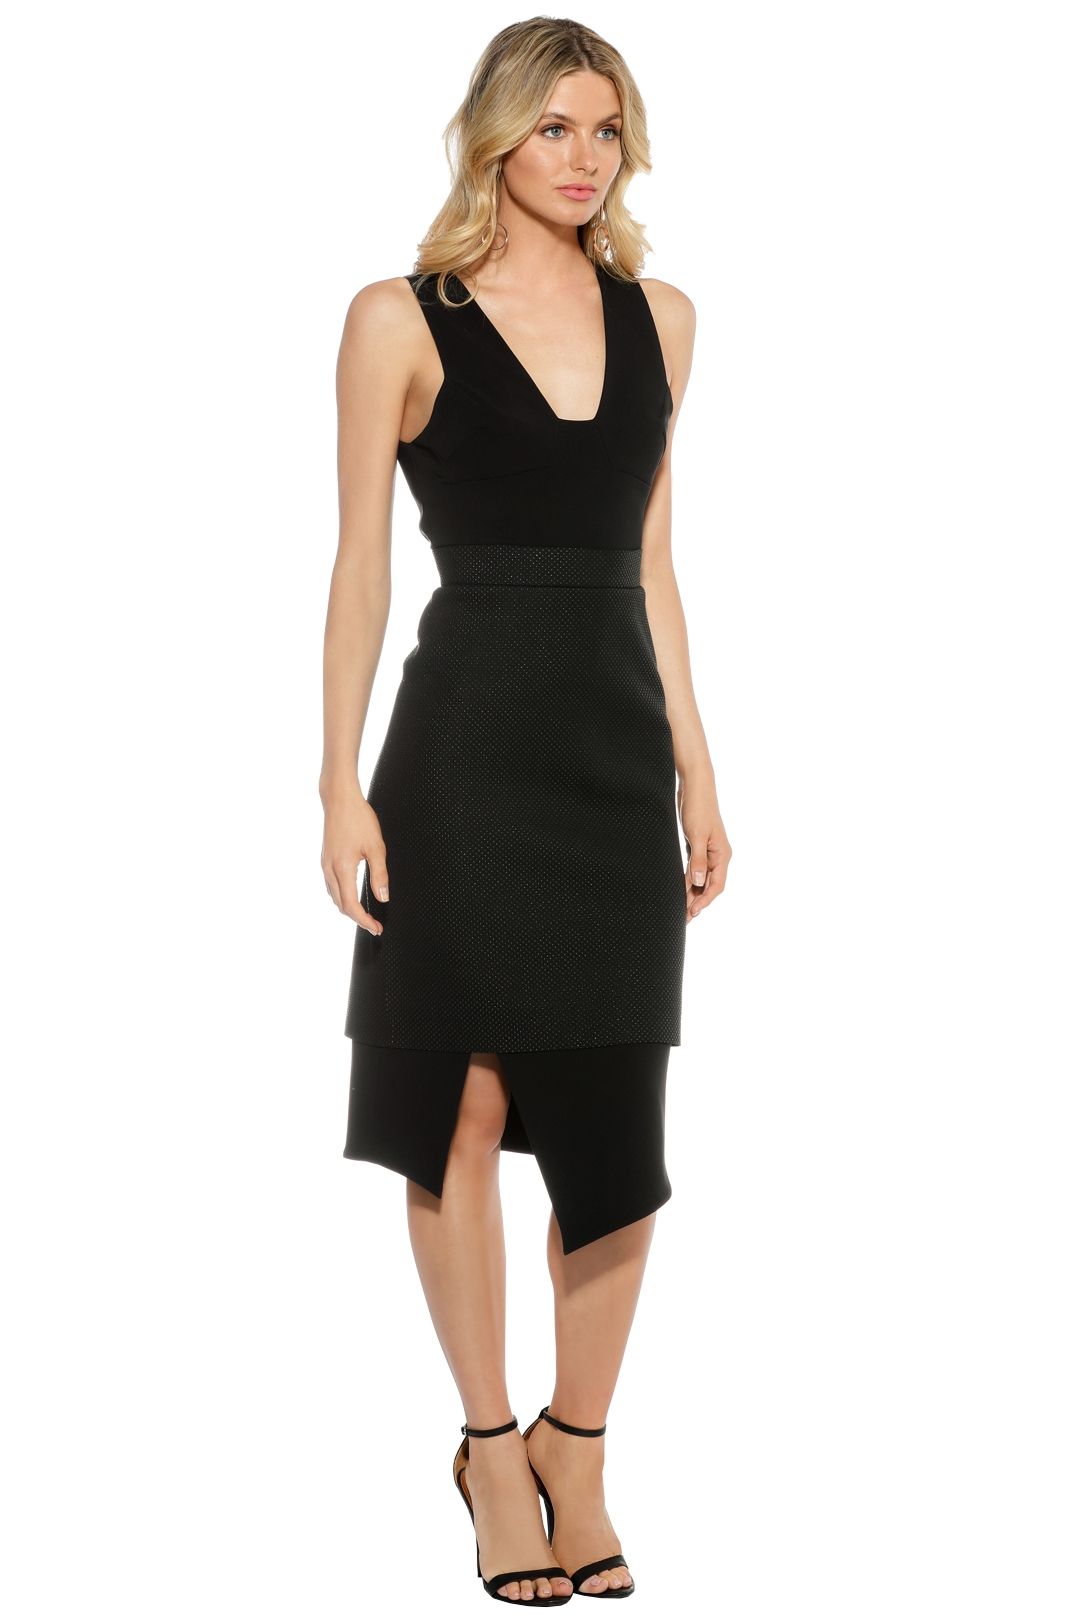 Camilla and Marc - Continuation Dress - Black - Side